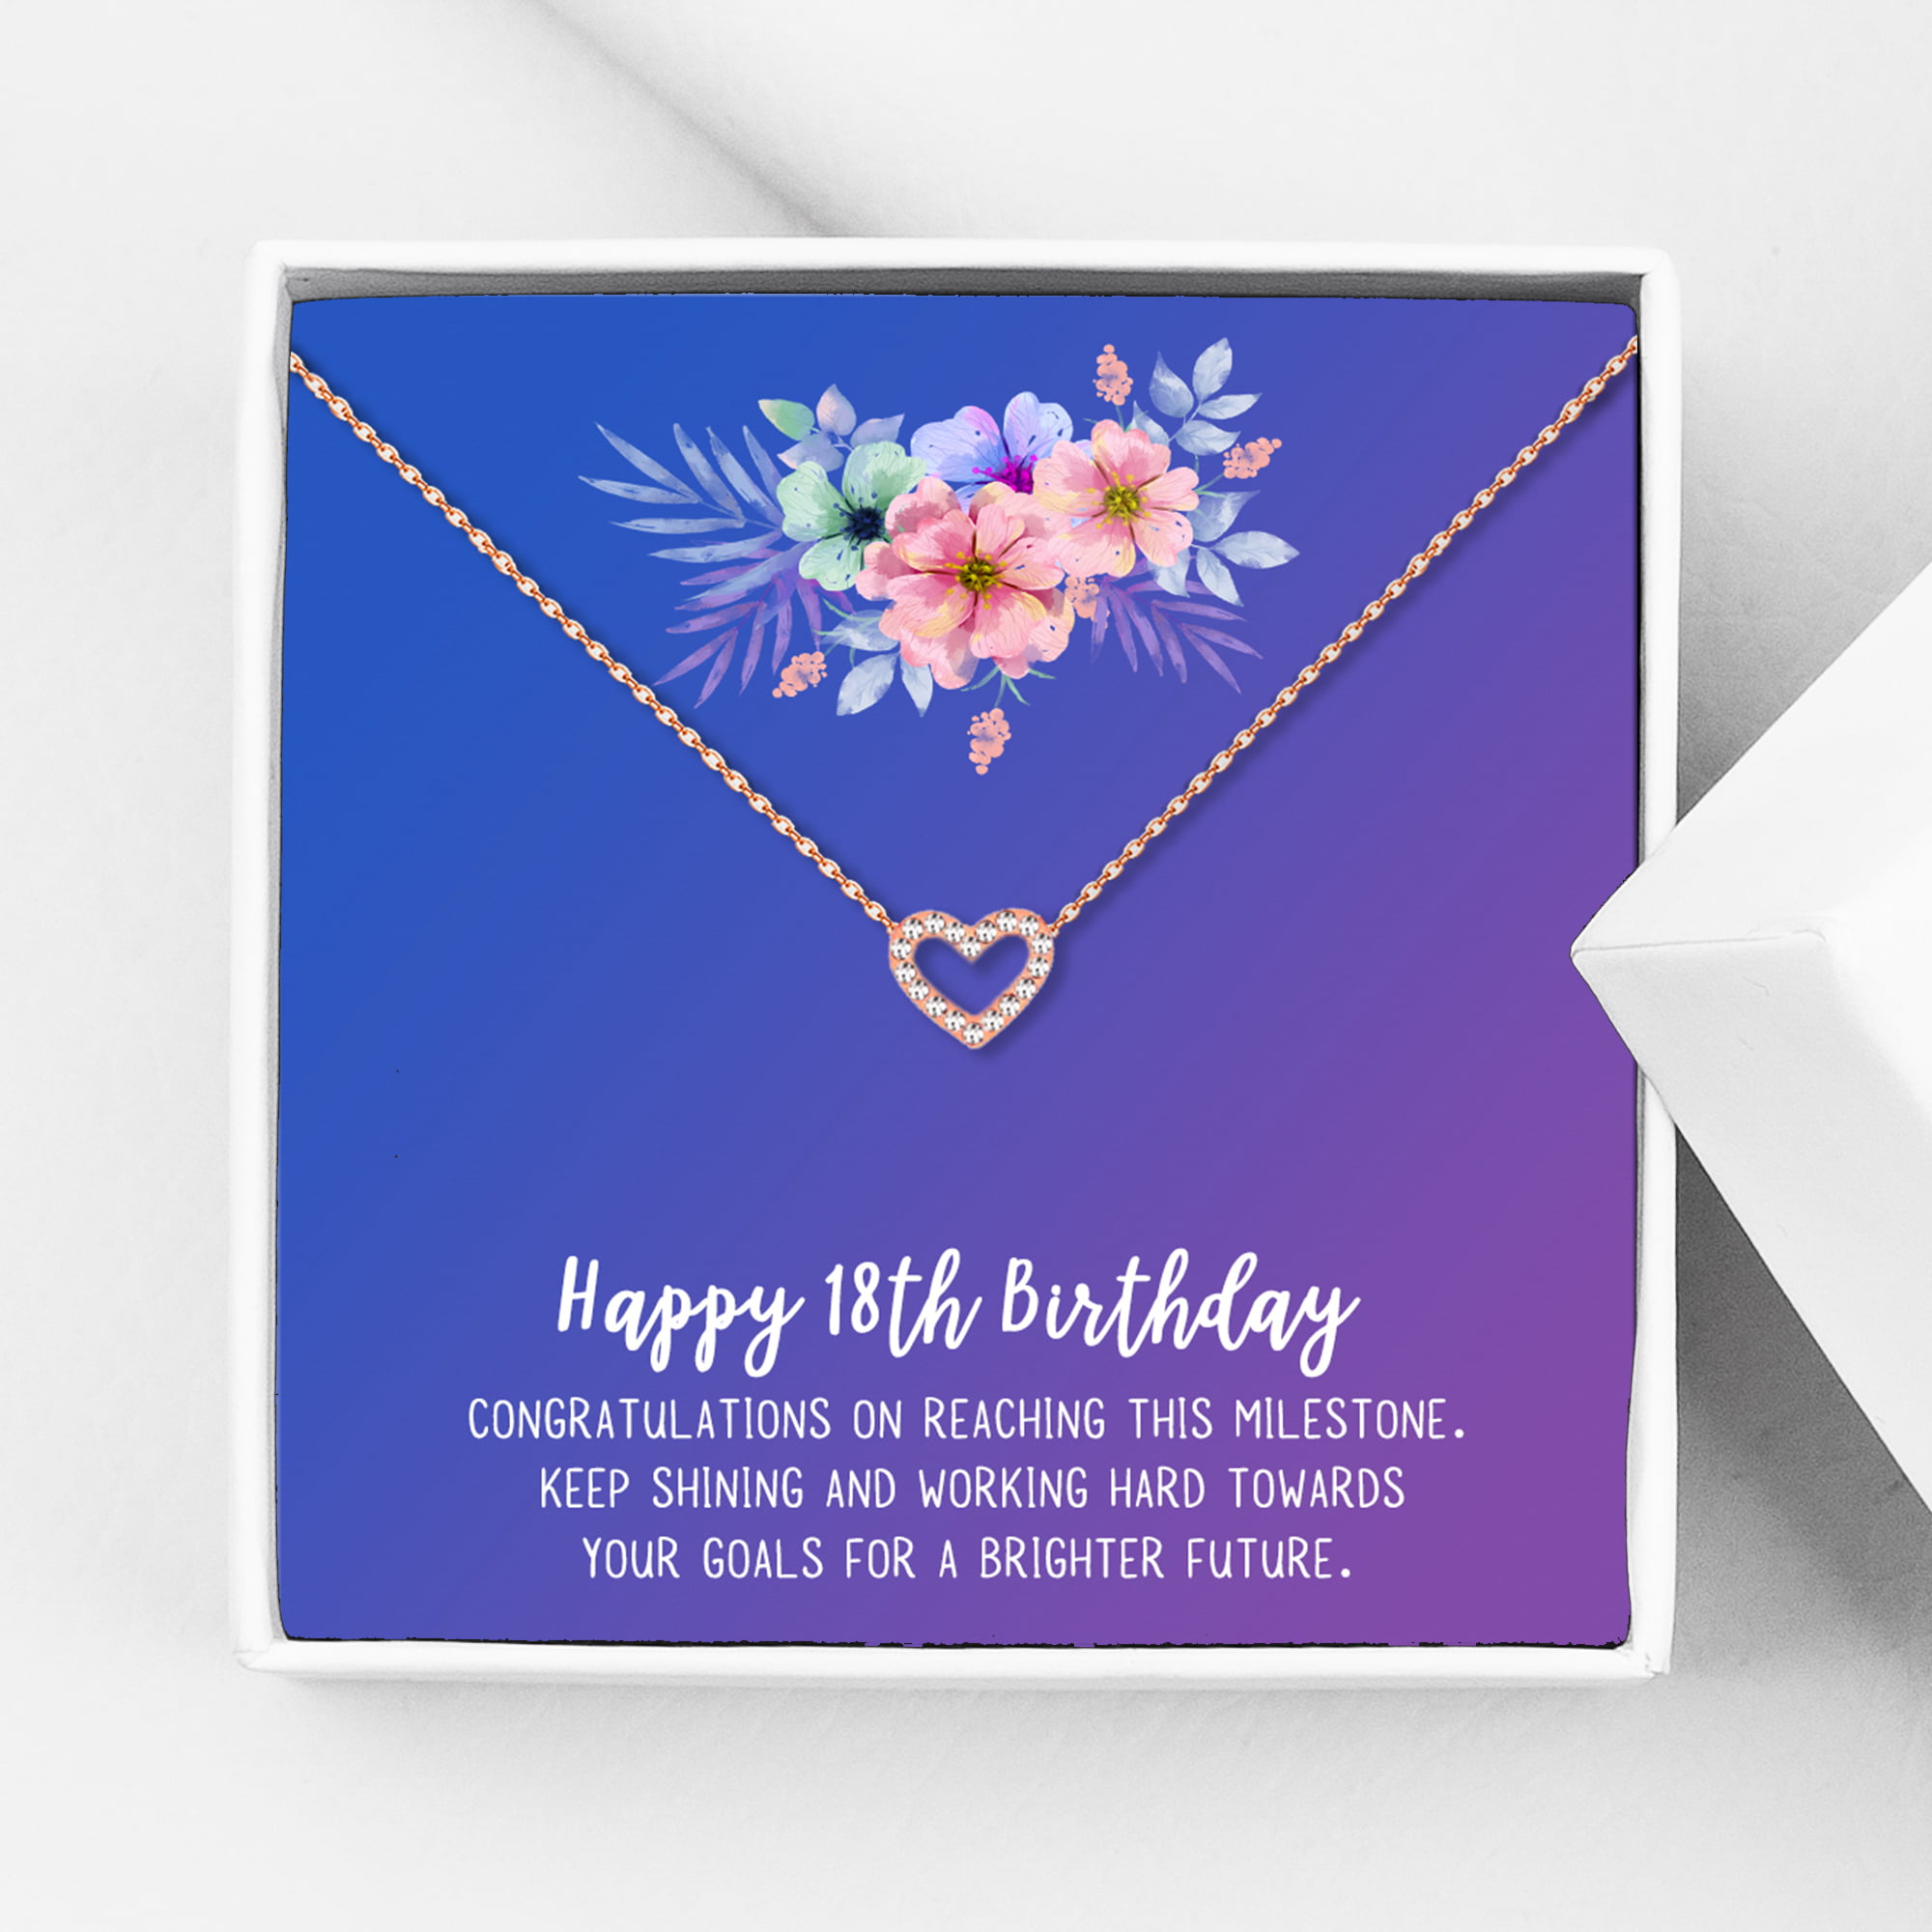 LEGO MOVIE Personalised Birthday Card FREE ShippingDaughter Niece Sister Girl 